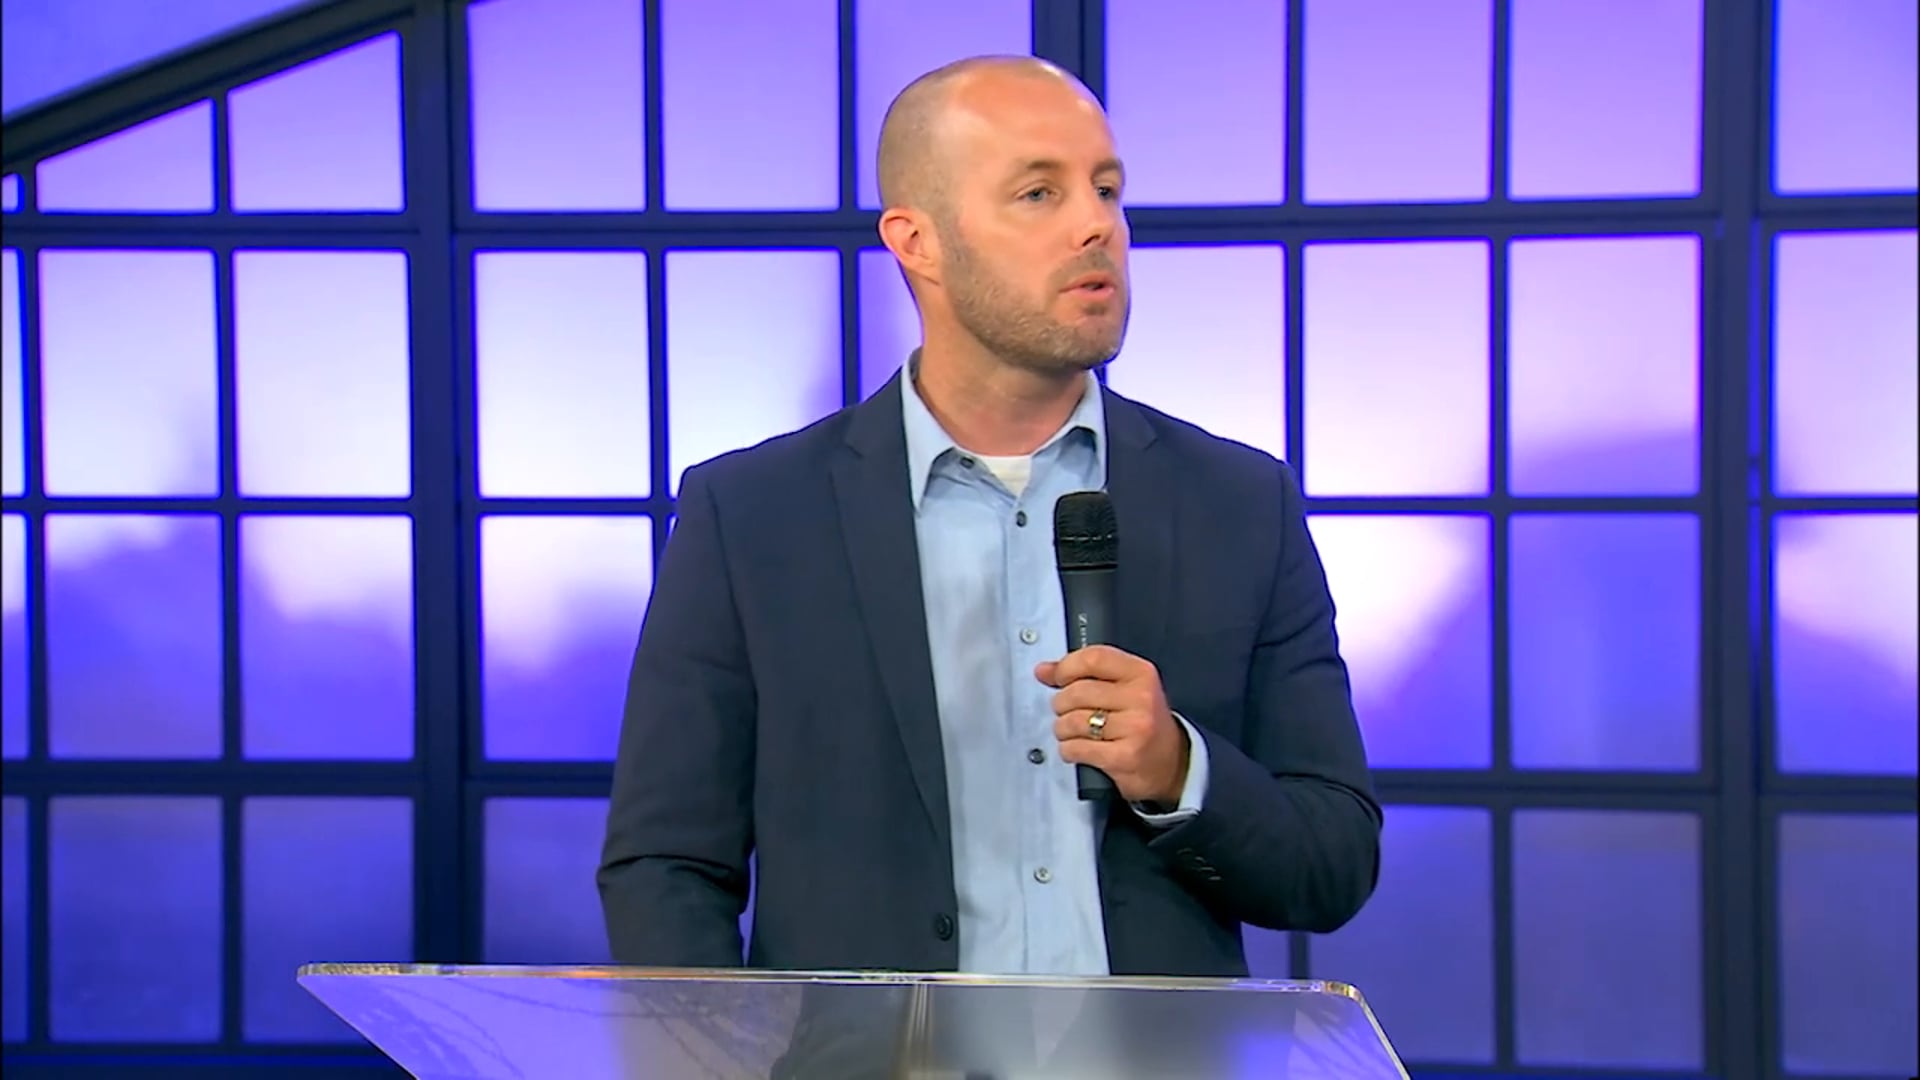 Jason Johnson: How to Handle a Church Leader Who Doesn't Seem to "Get It"